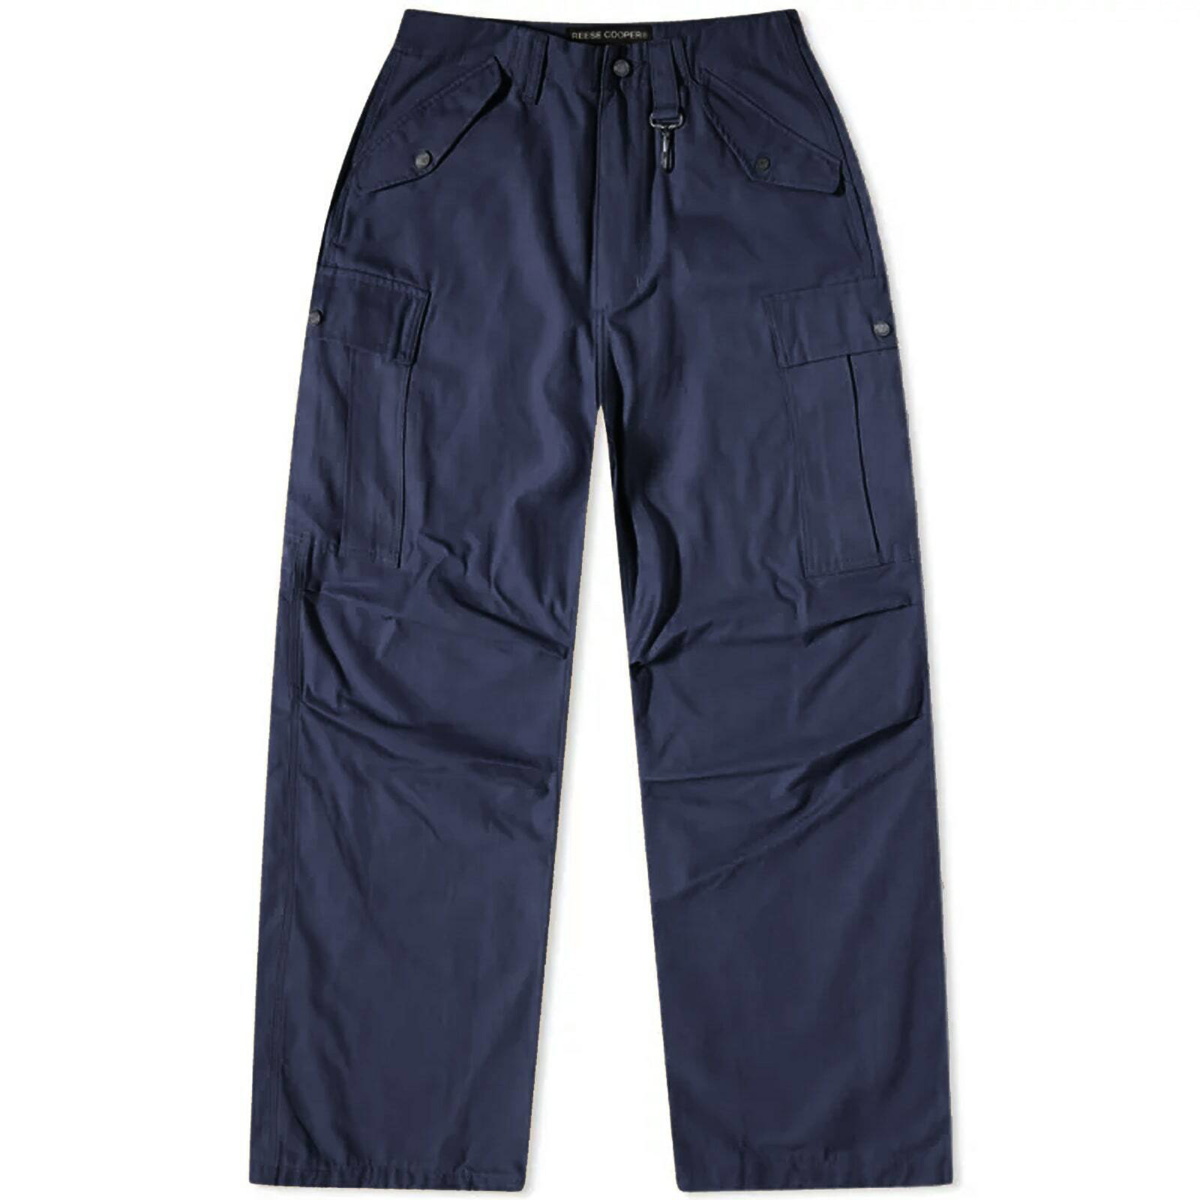 Reese Cooper Men's Cotton Cargo Pant in Navy Blue Reese Cooper